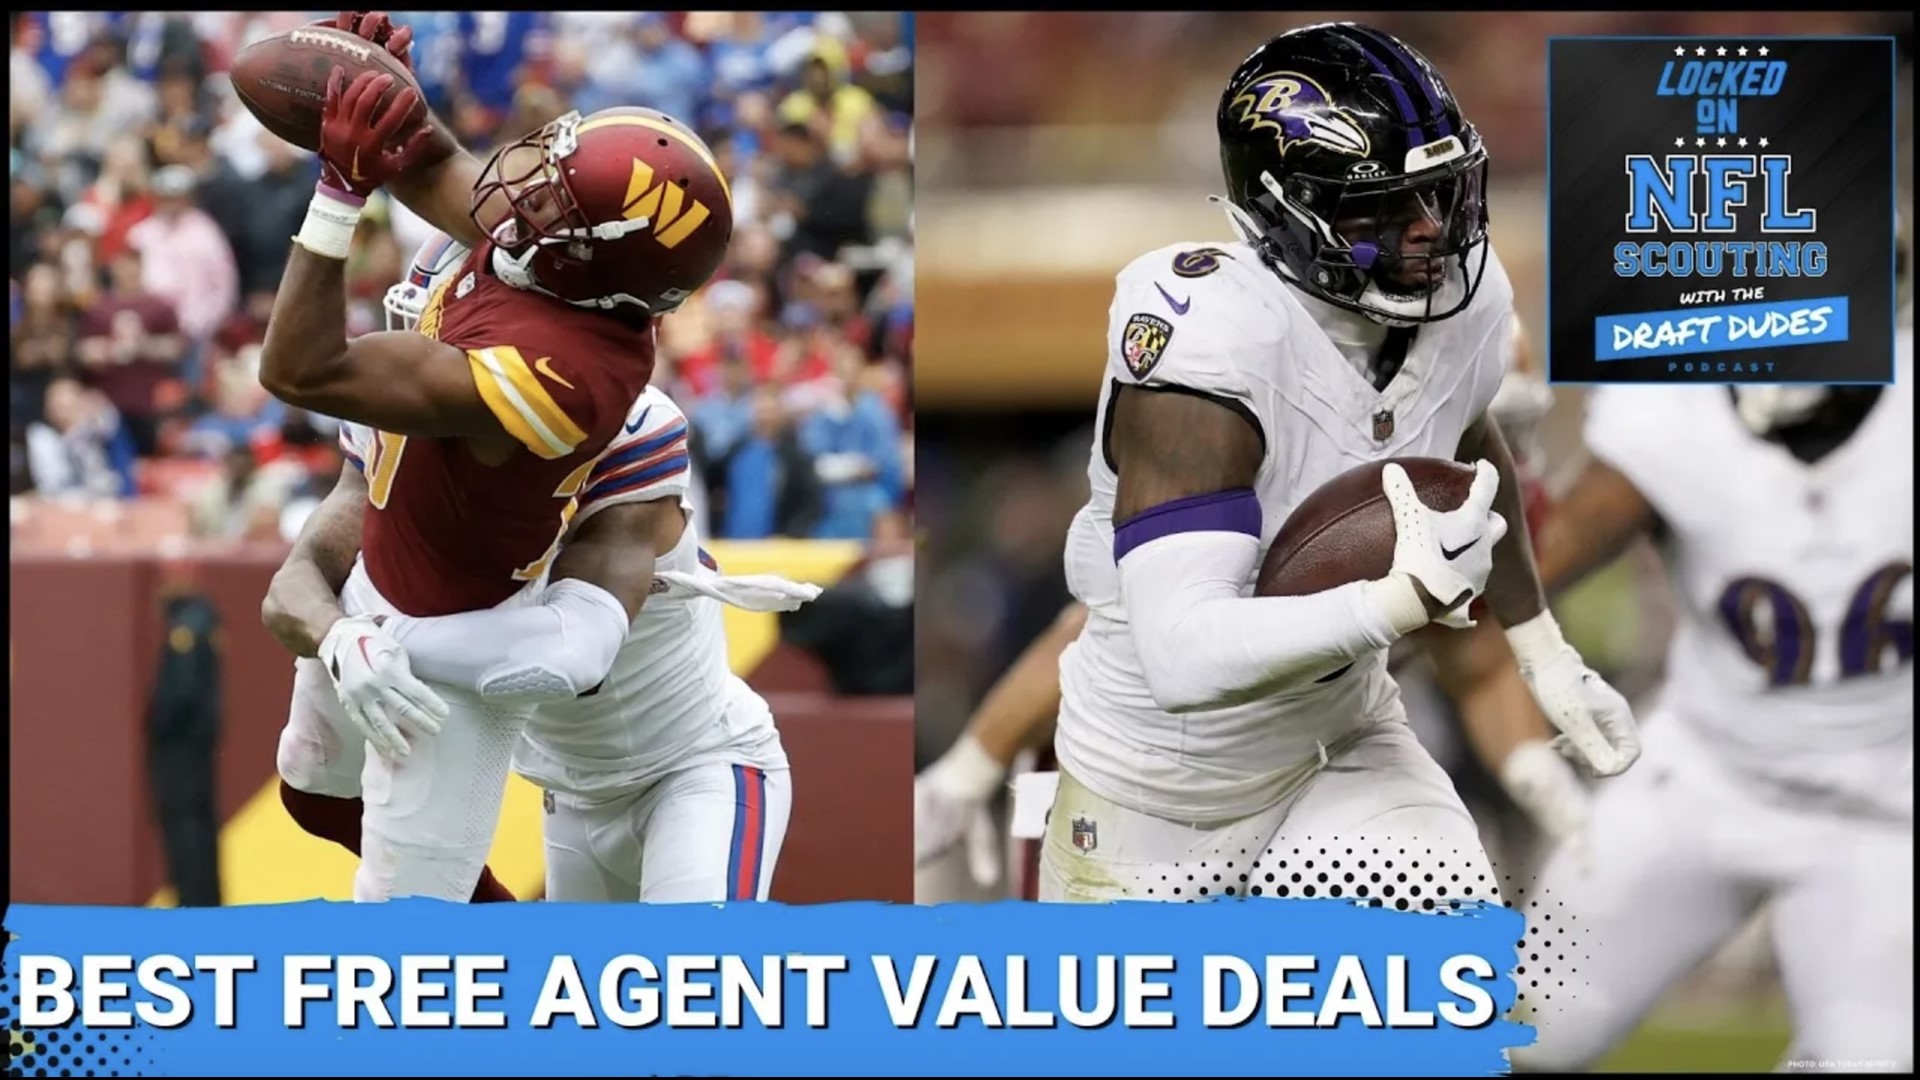 The NFL is a limited resource environment so finding value is critically important. So which teams found the best value contracts in free agency.